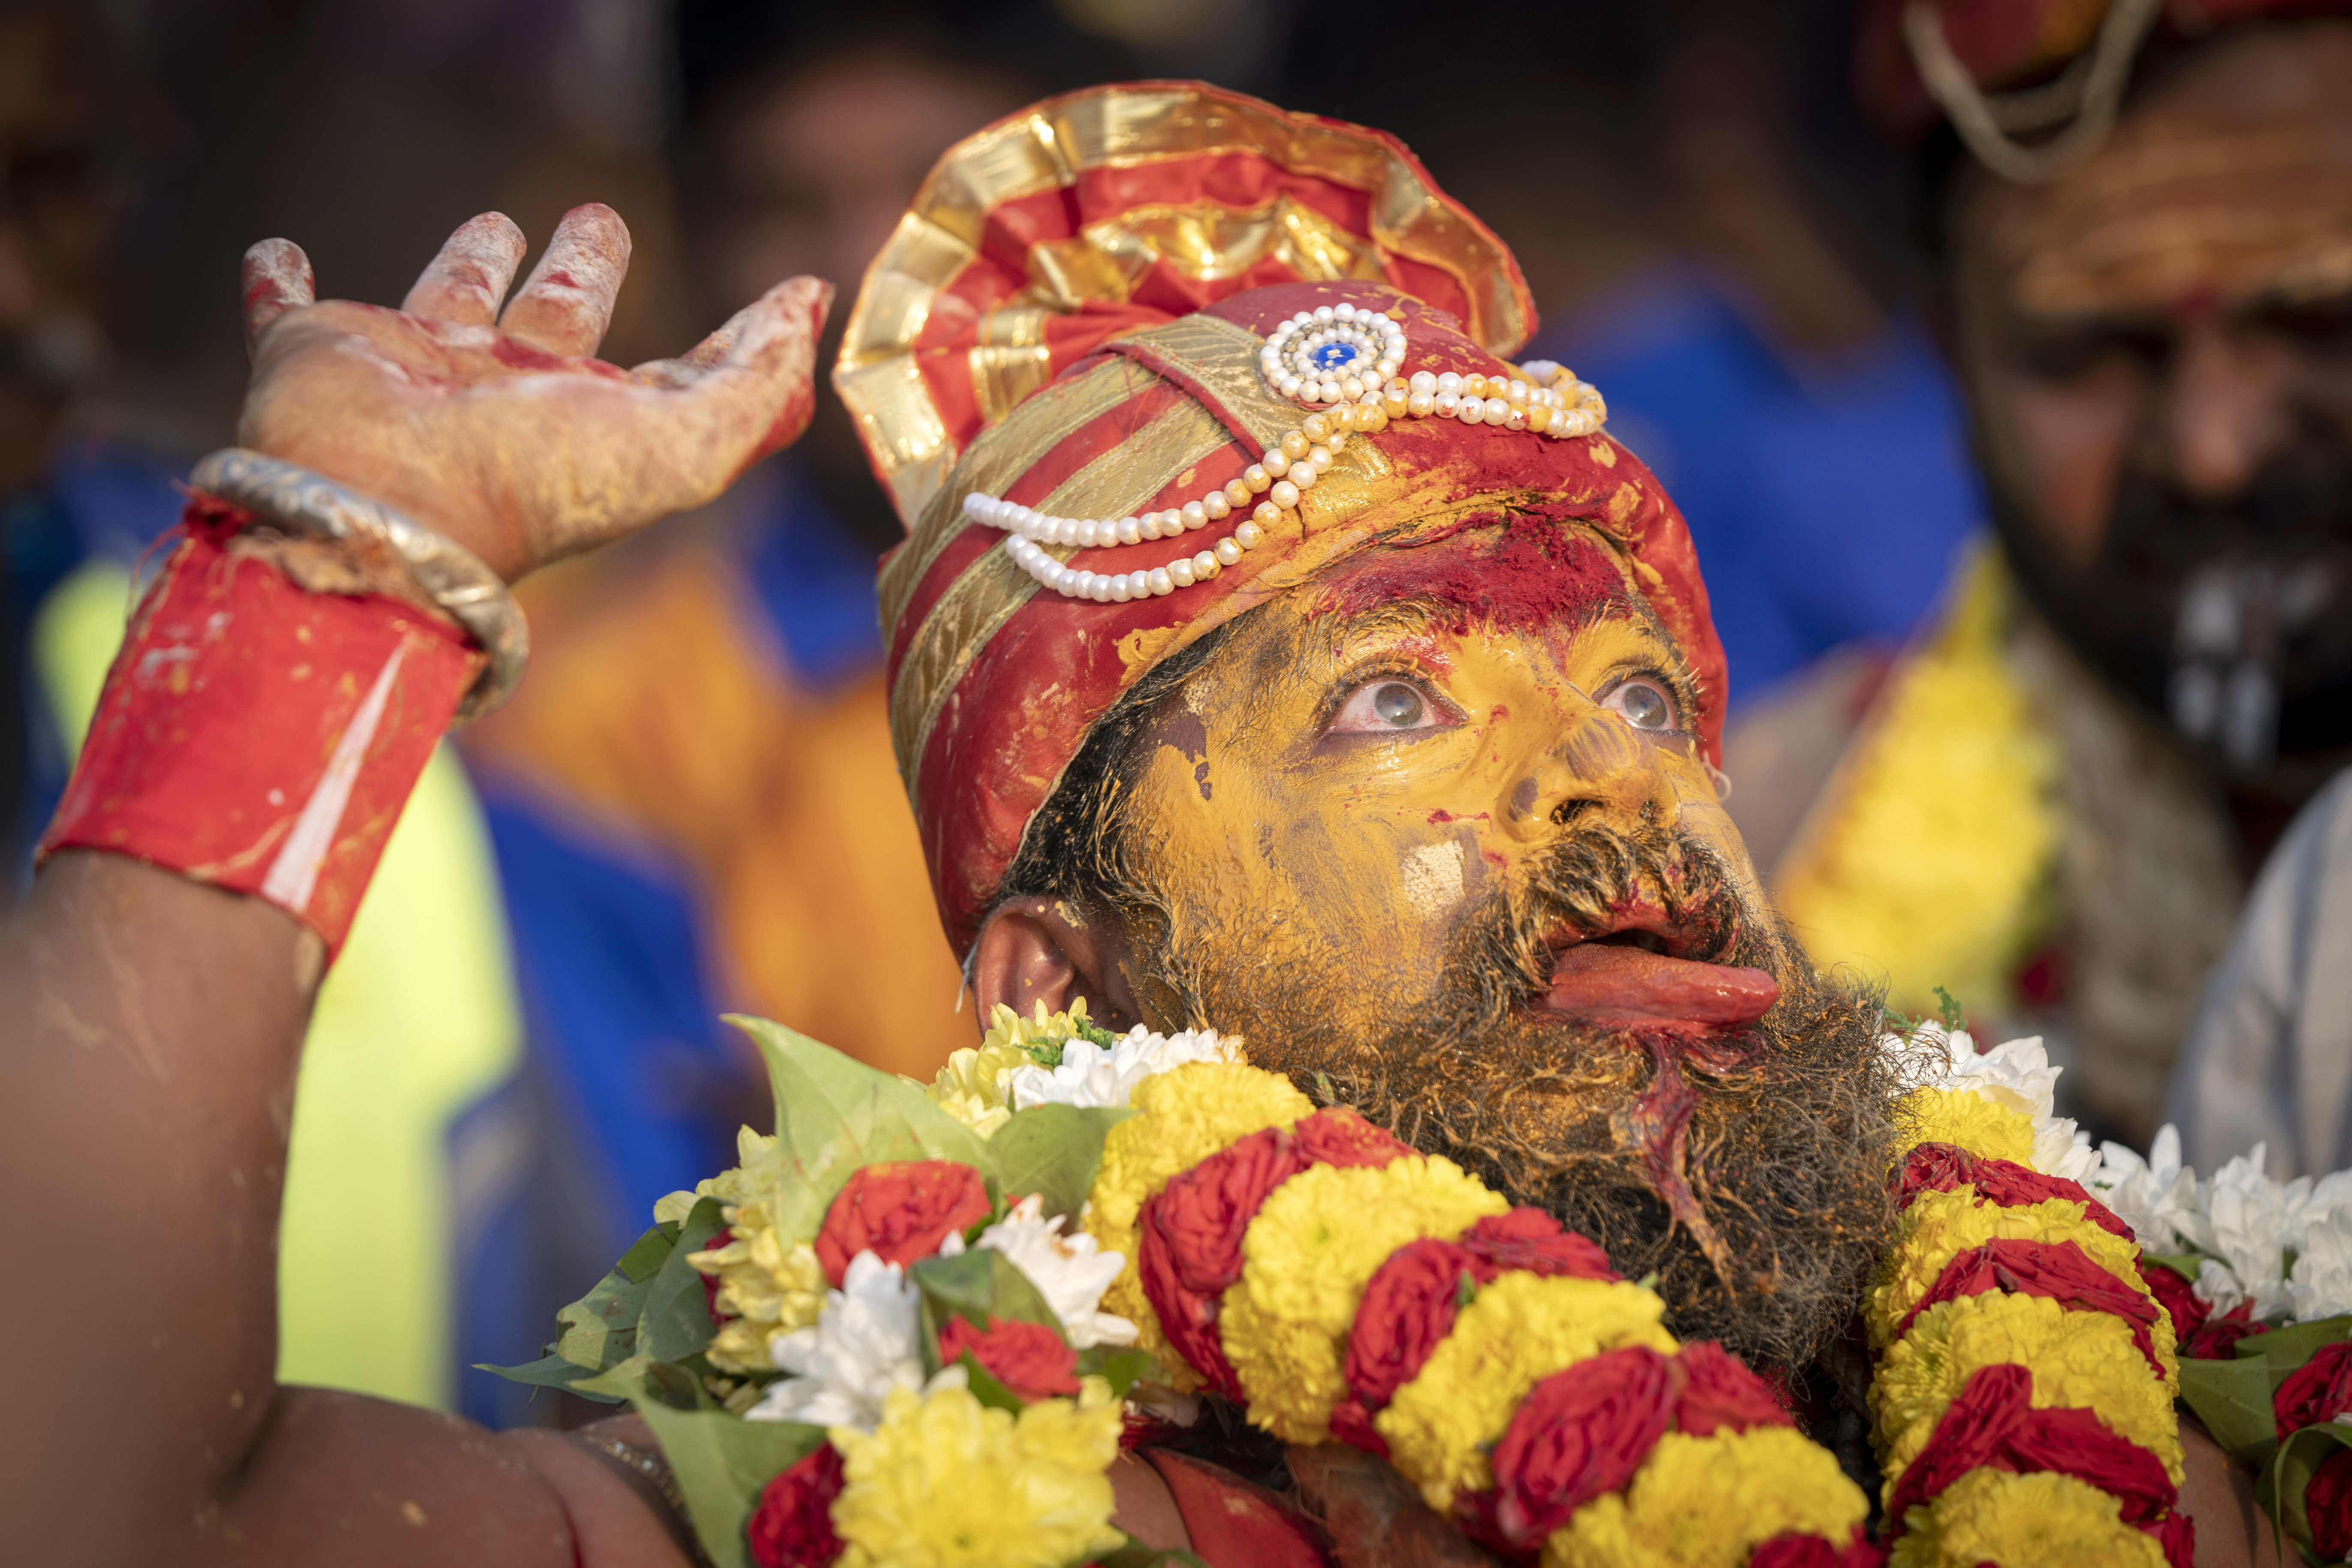 A Tamil Hindu priest has antiseptic powder on his face in a procession during the Thaipusam festival at Batu Caves, outskirts of Kuala Lumpur, Saturday, Feb. 8, 2020. Thaipusam, which is celebrated in honor of Hindu god Lord Murugan, is an annual procession by Hindu devotees seeking blessings, fulfilling vows and offering thanks. (AP Photo/Vincent Thian)